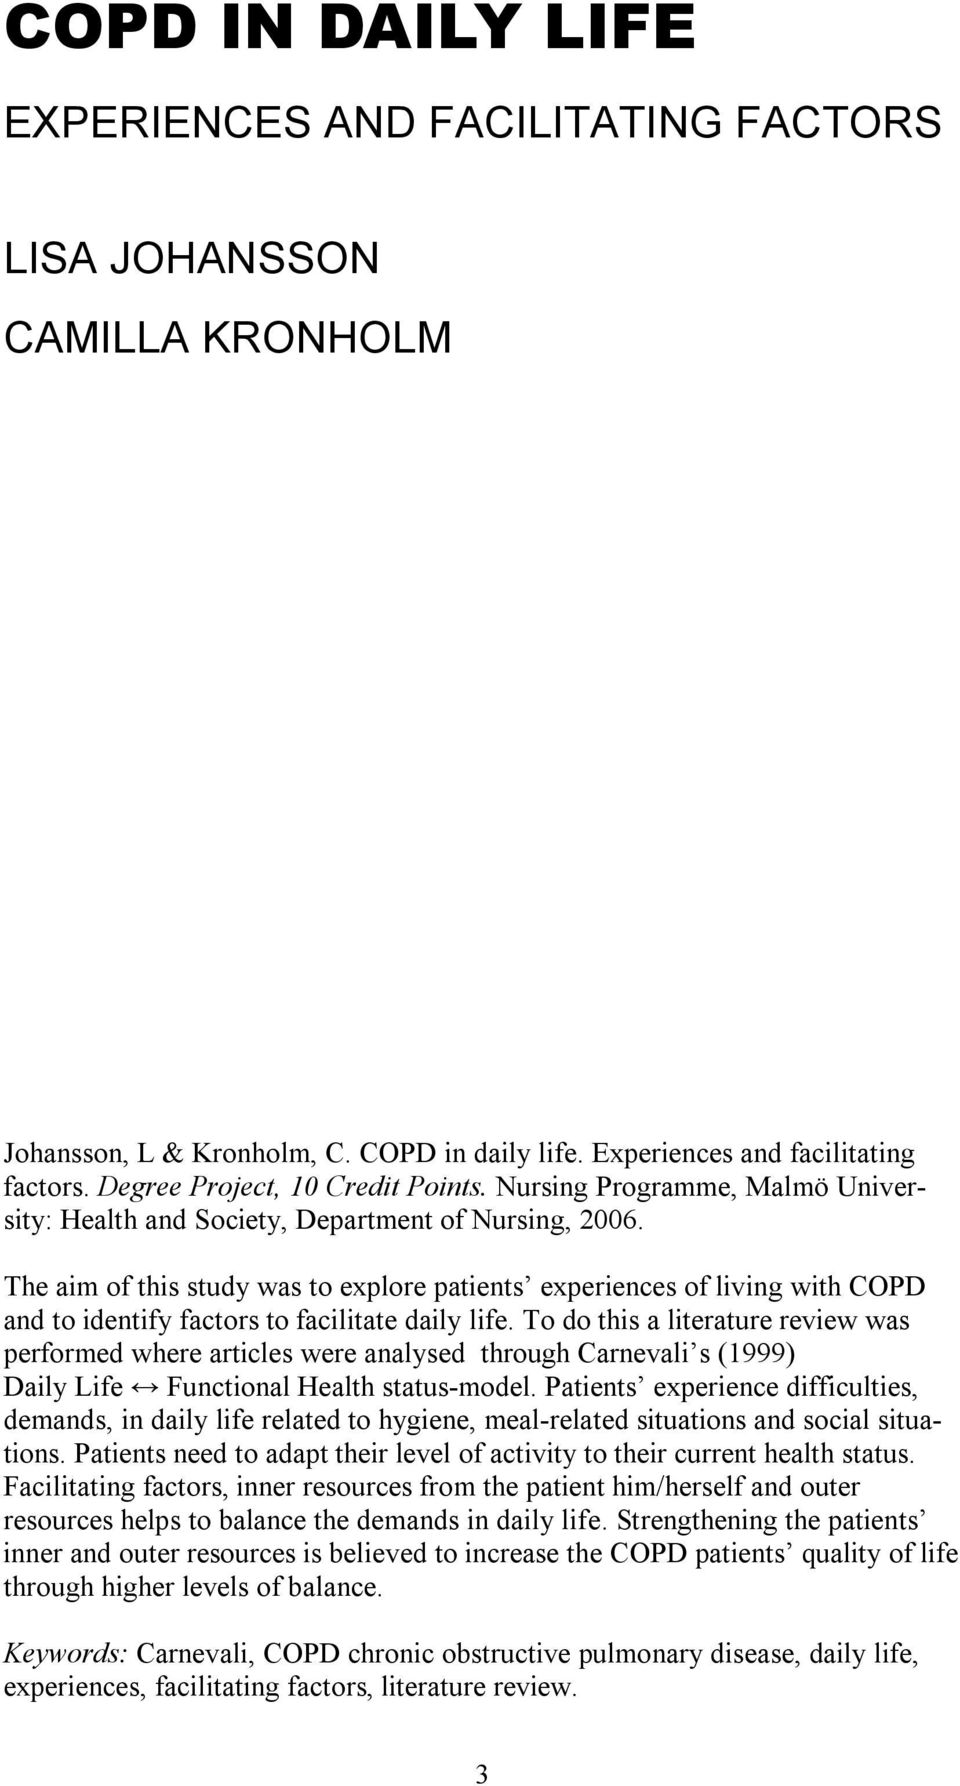 The aim of this study was to explore patients experiences of living with COPD and to identify factors to facilitate daily life.